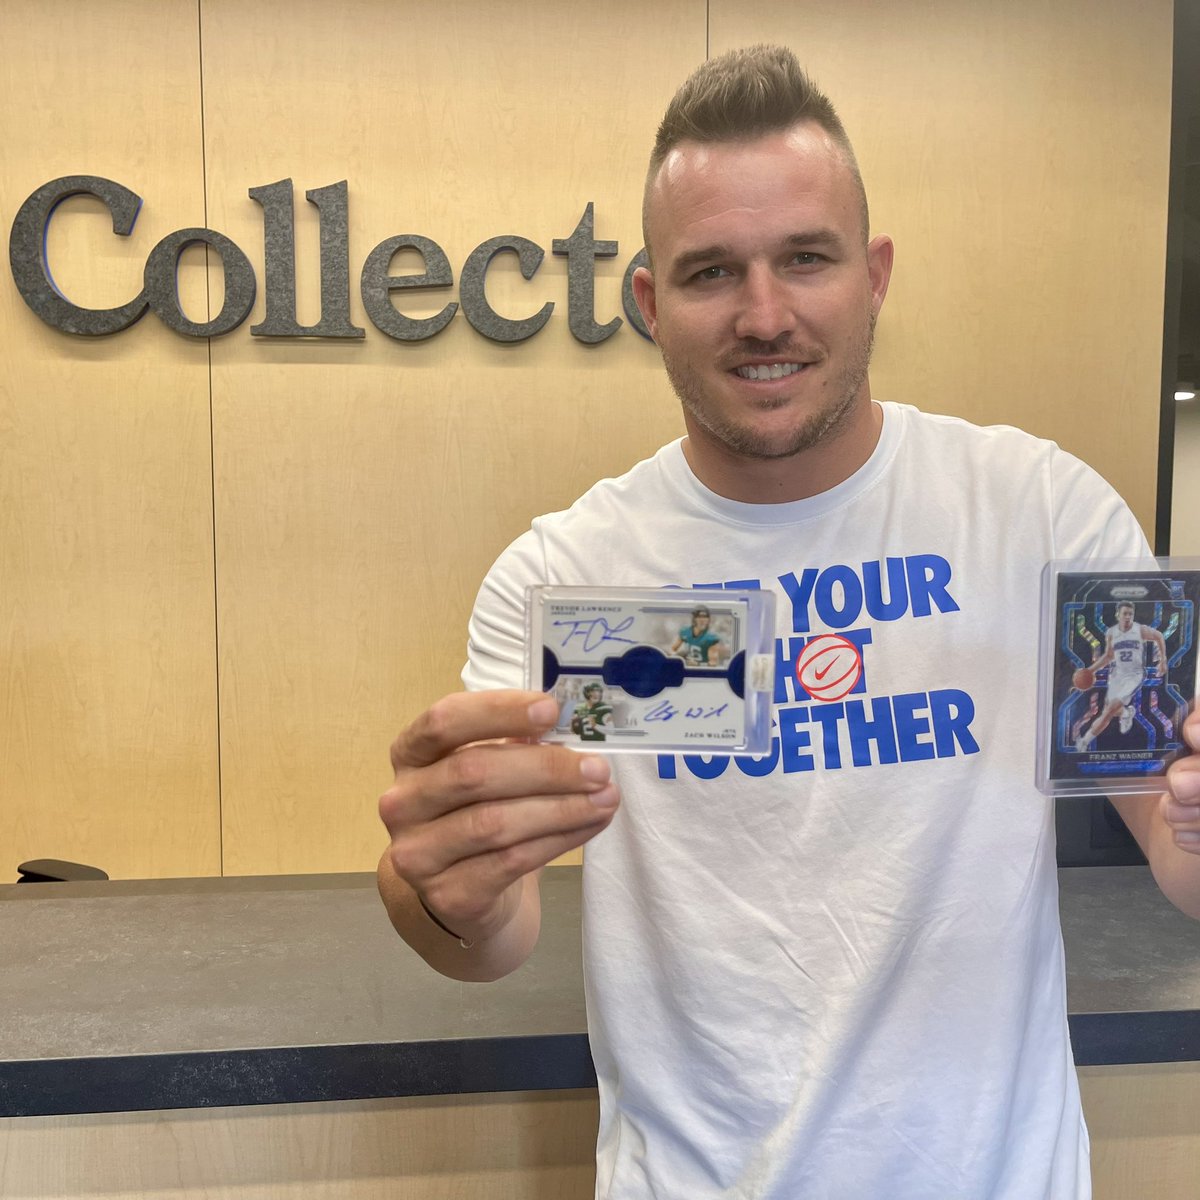 Look who stopped by to submit some recent pulls for grading on his day off. 🐐 PSA x @MikeTrout